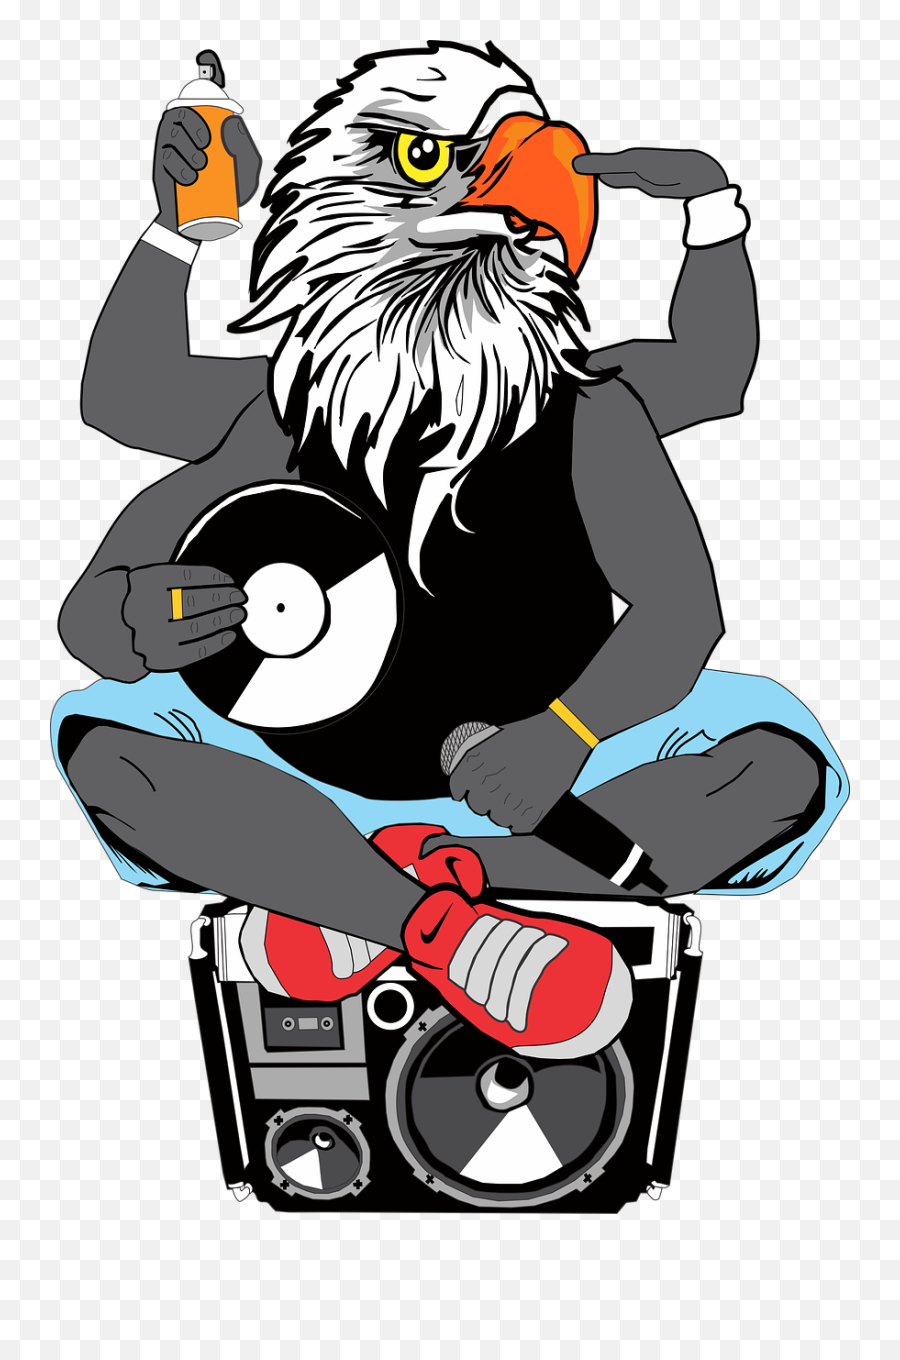 Openclipart - Clipping Culture Eagle With Microphone Emoji,Dj Clipart